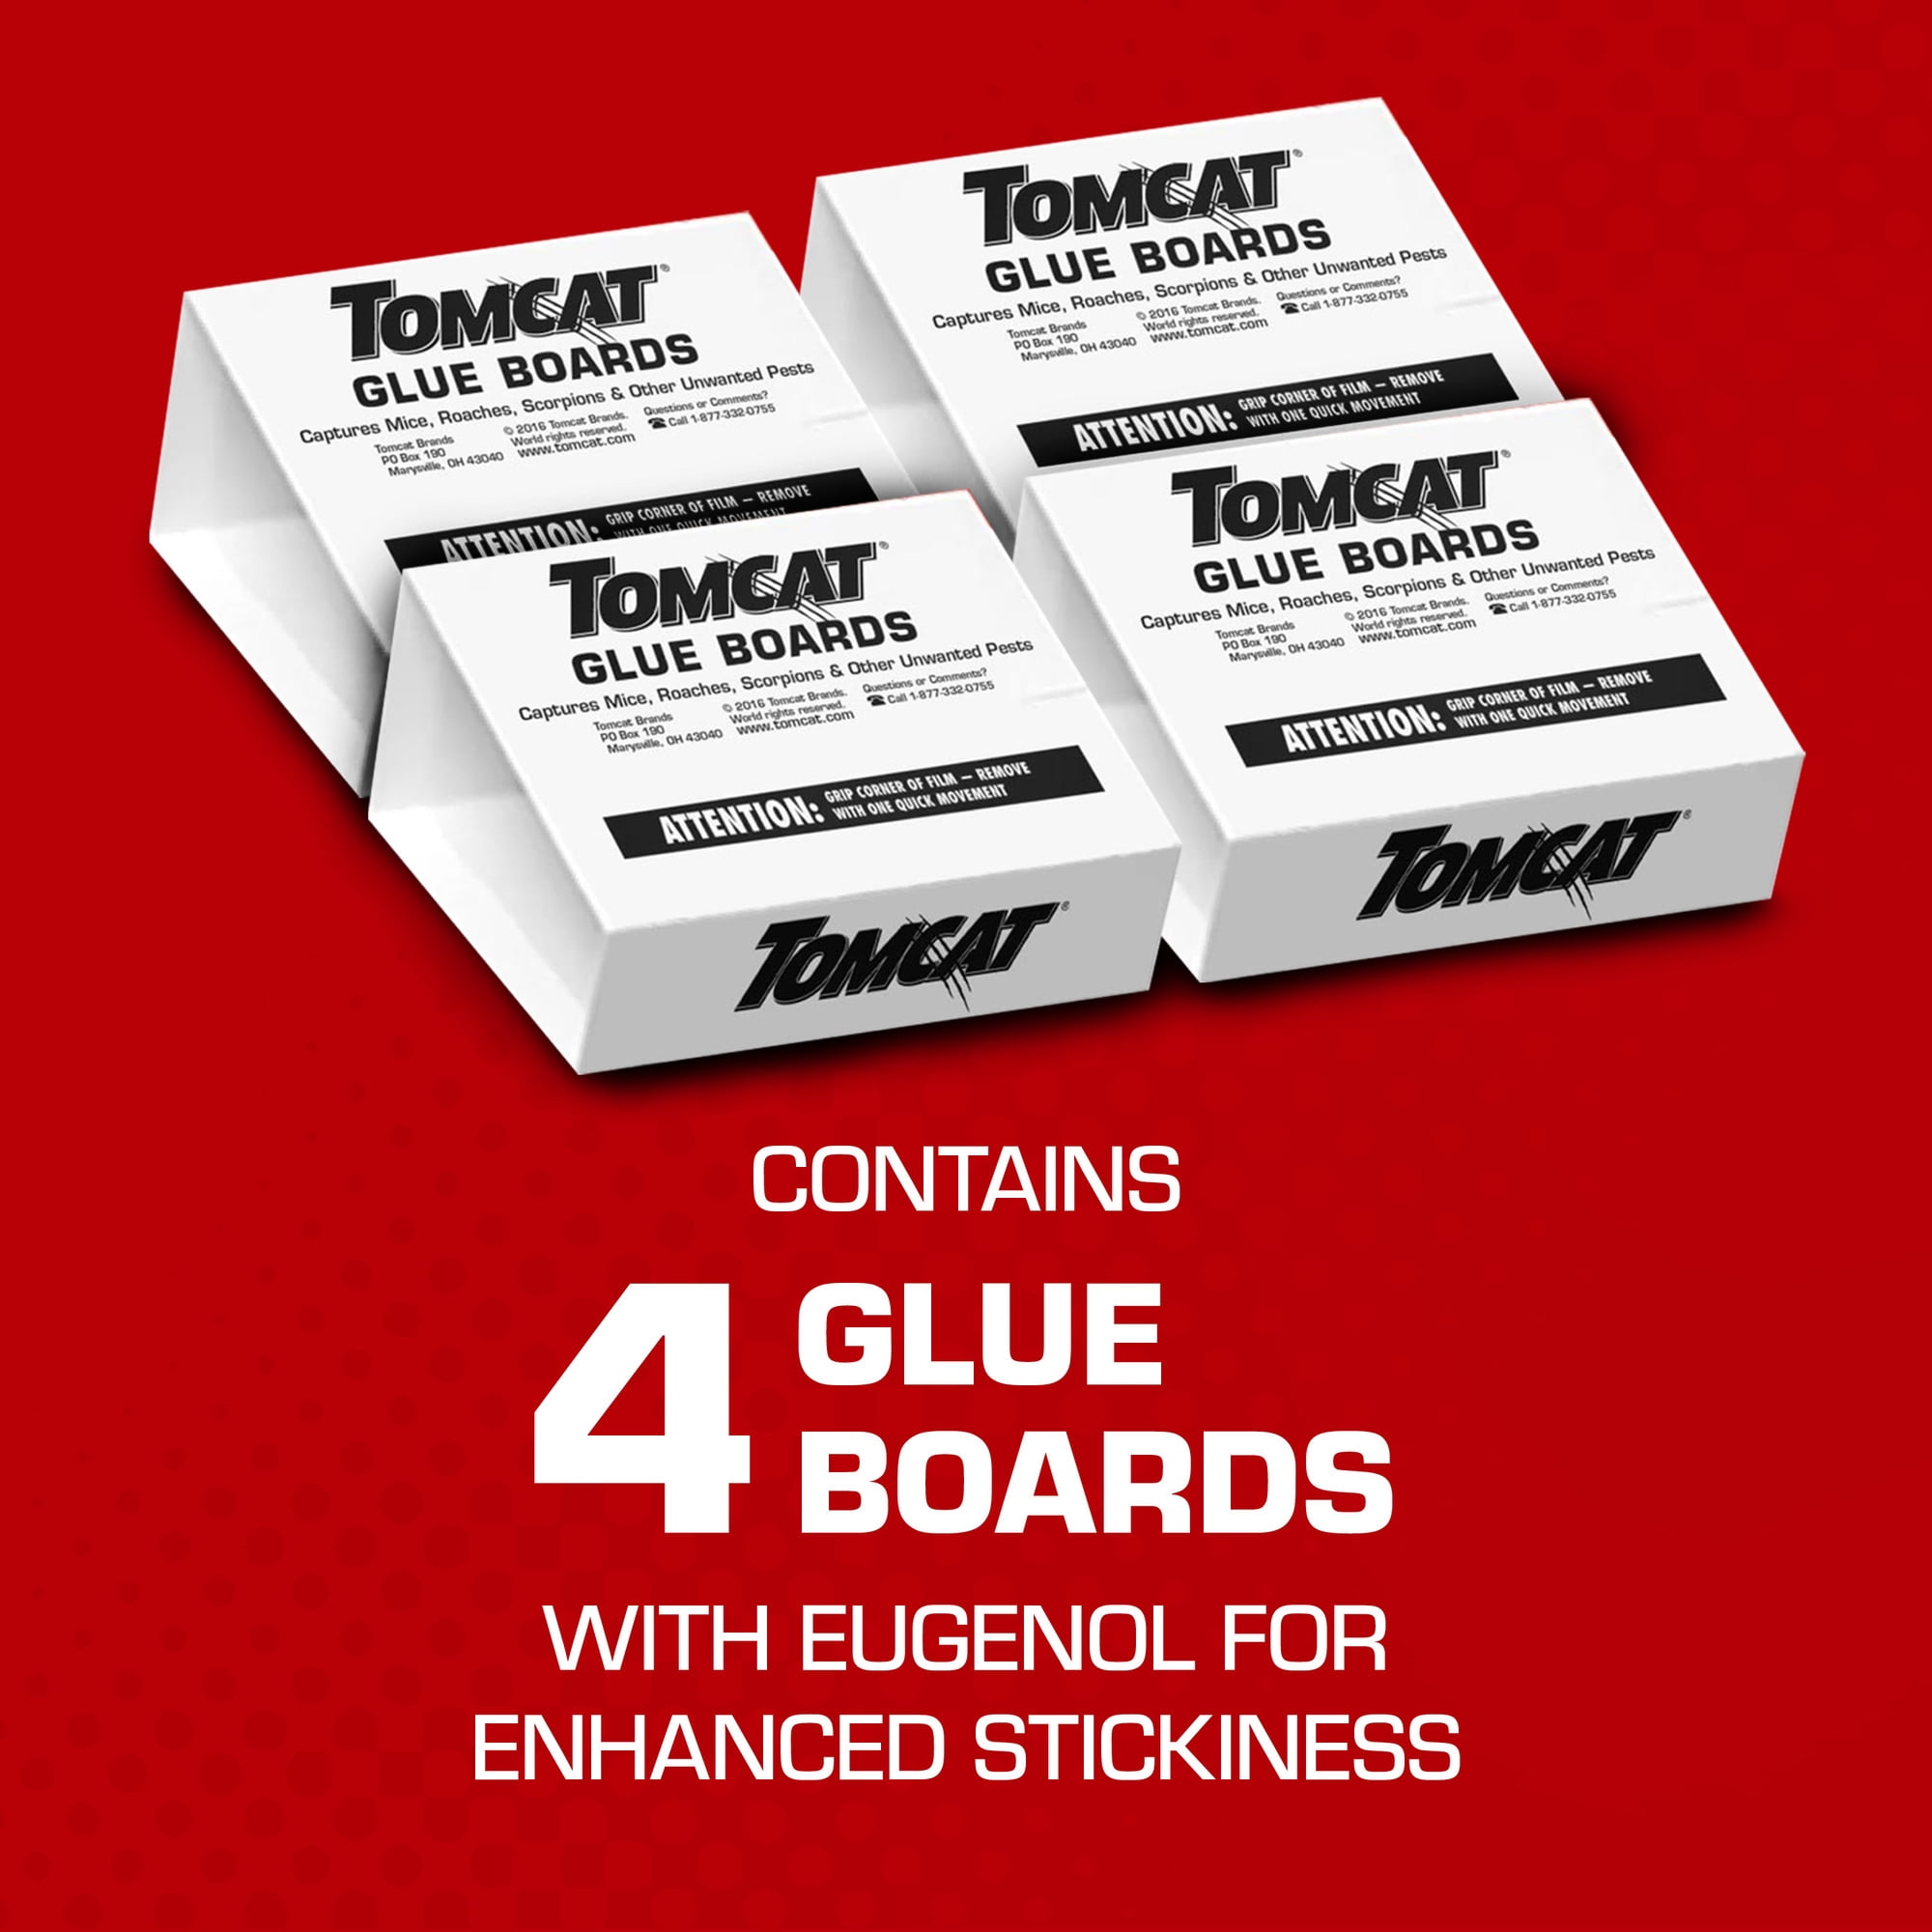 Tomcat Ready to Use Glue Sticky Mouse Traps ~ 4 Pack ~ 16 Traps